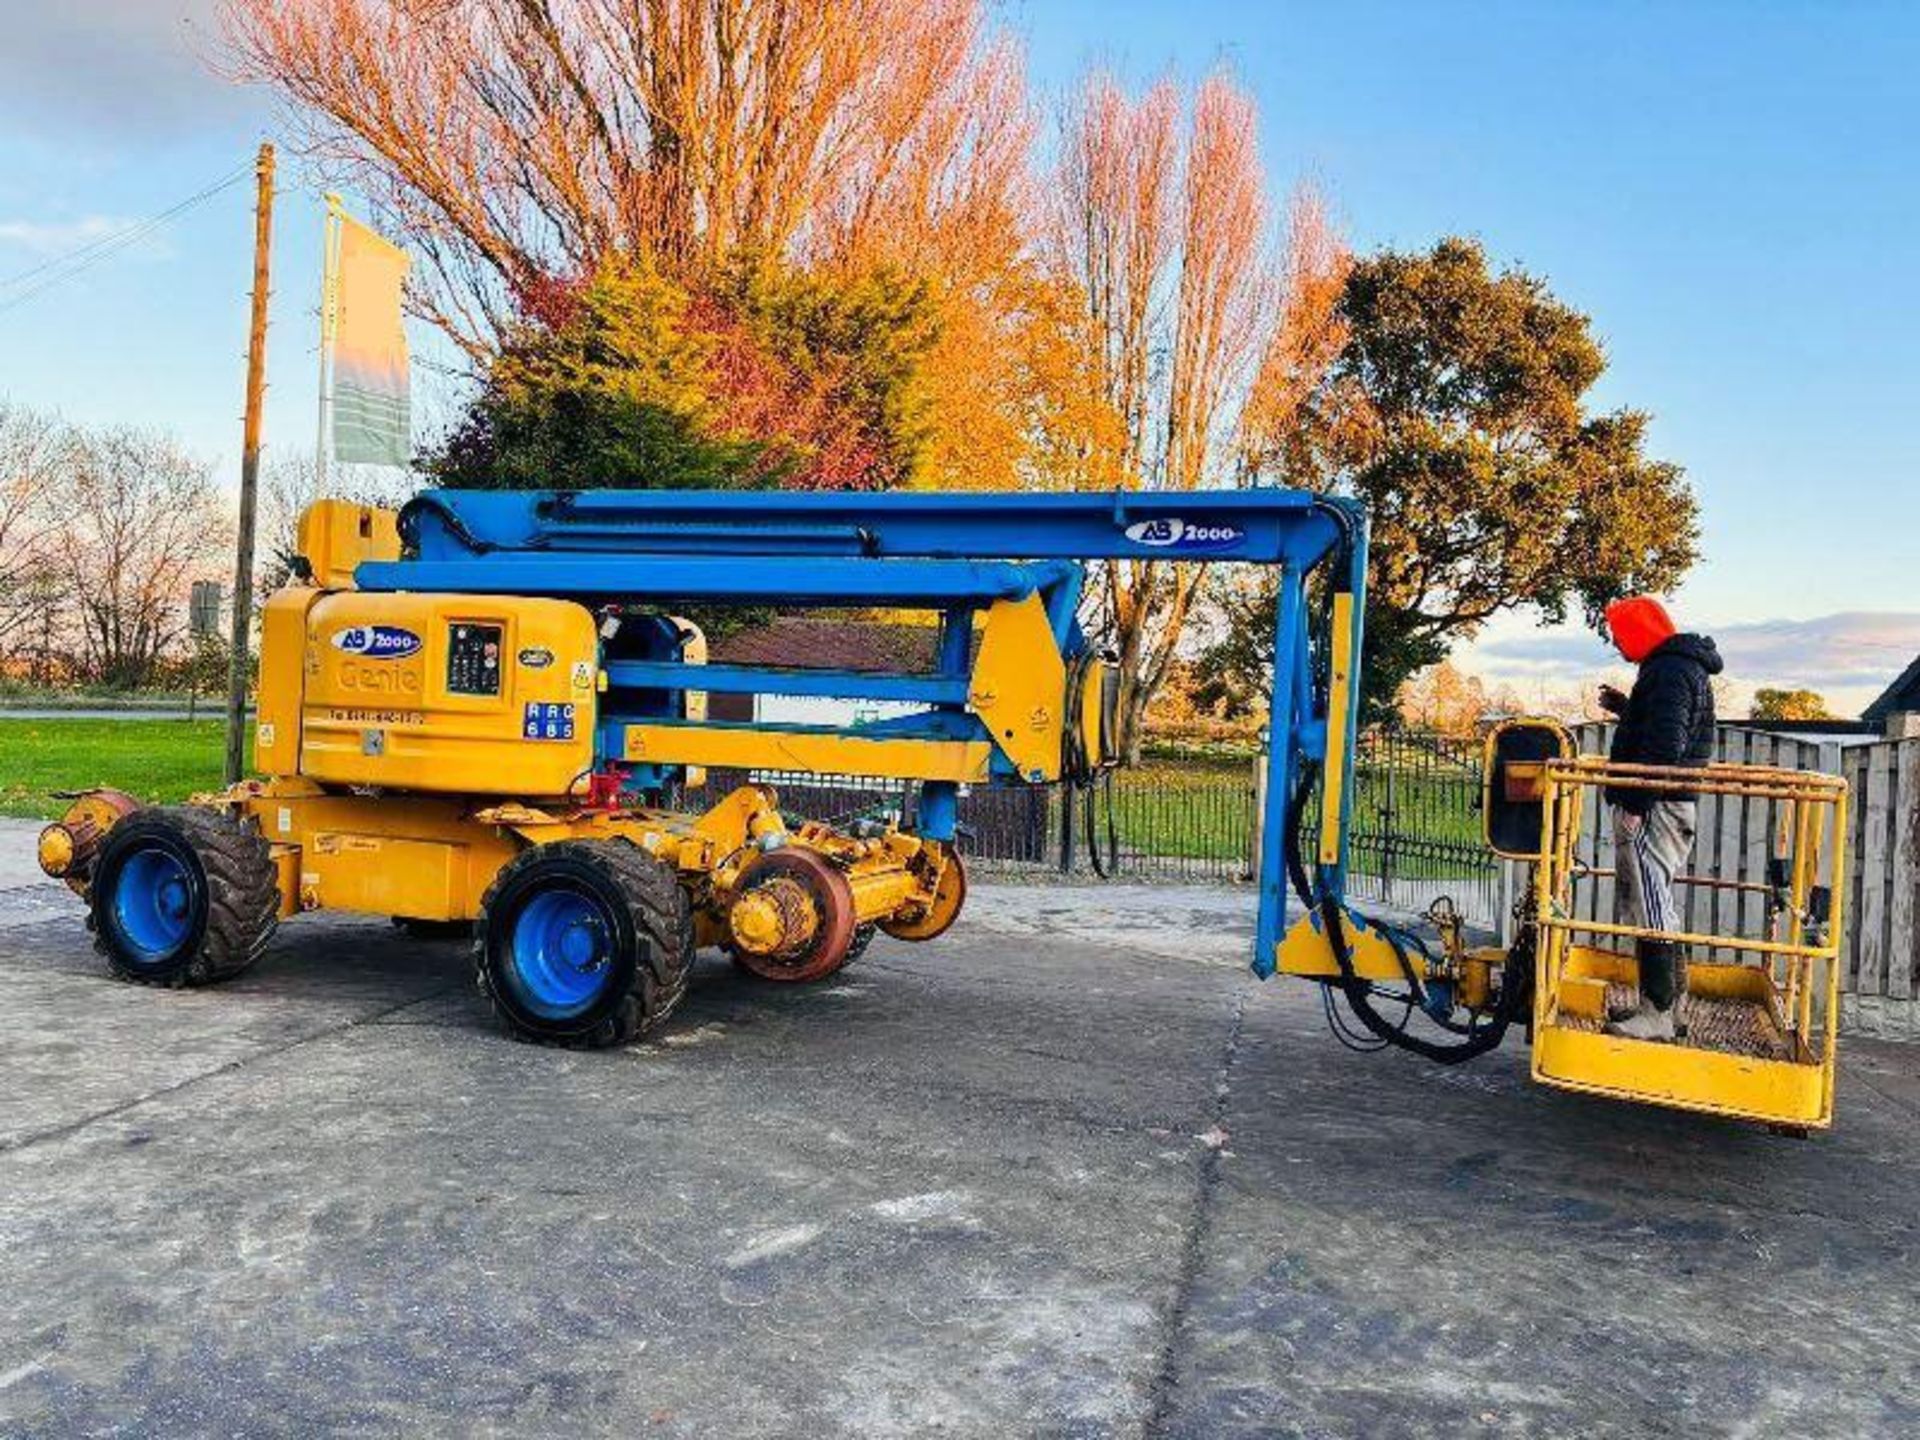 GENIE Z-60/34 4WD ARTICULATED RAIL ROAD BOOM LIFT * 20.3 METER REACH * - Image 4 of 15